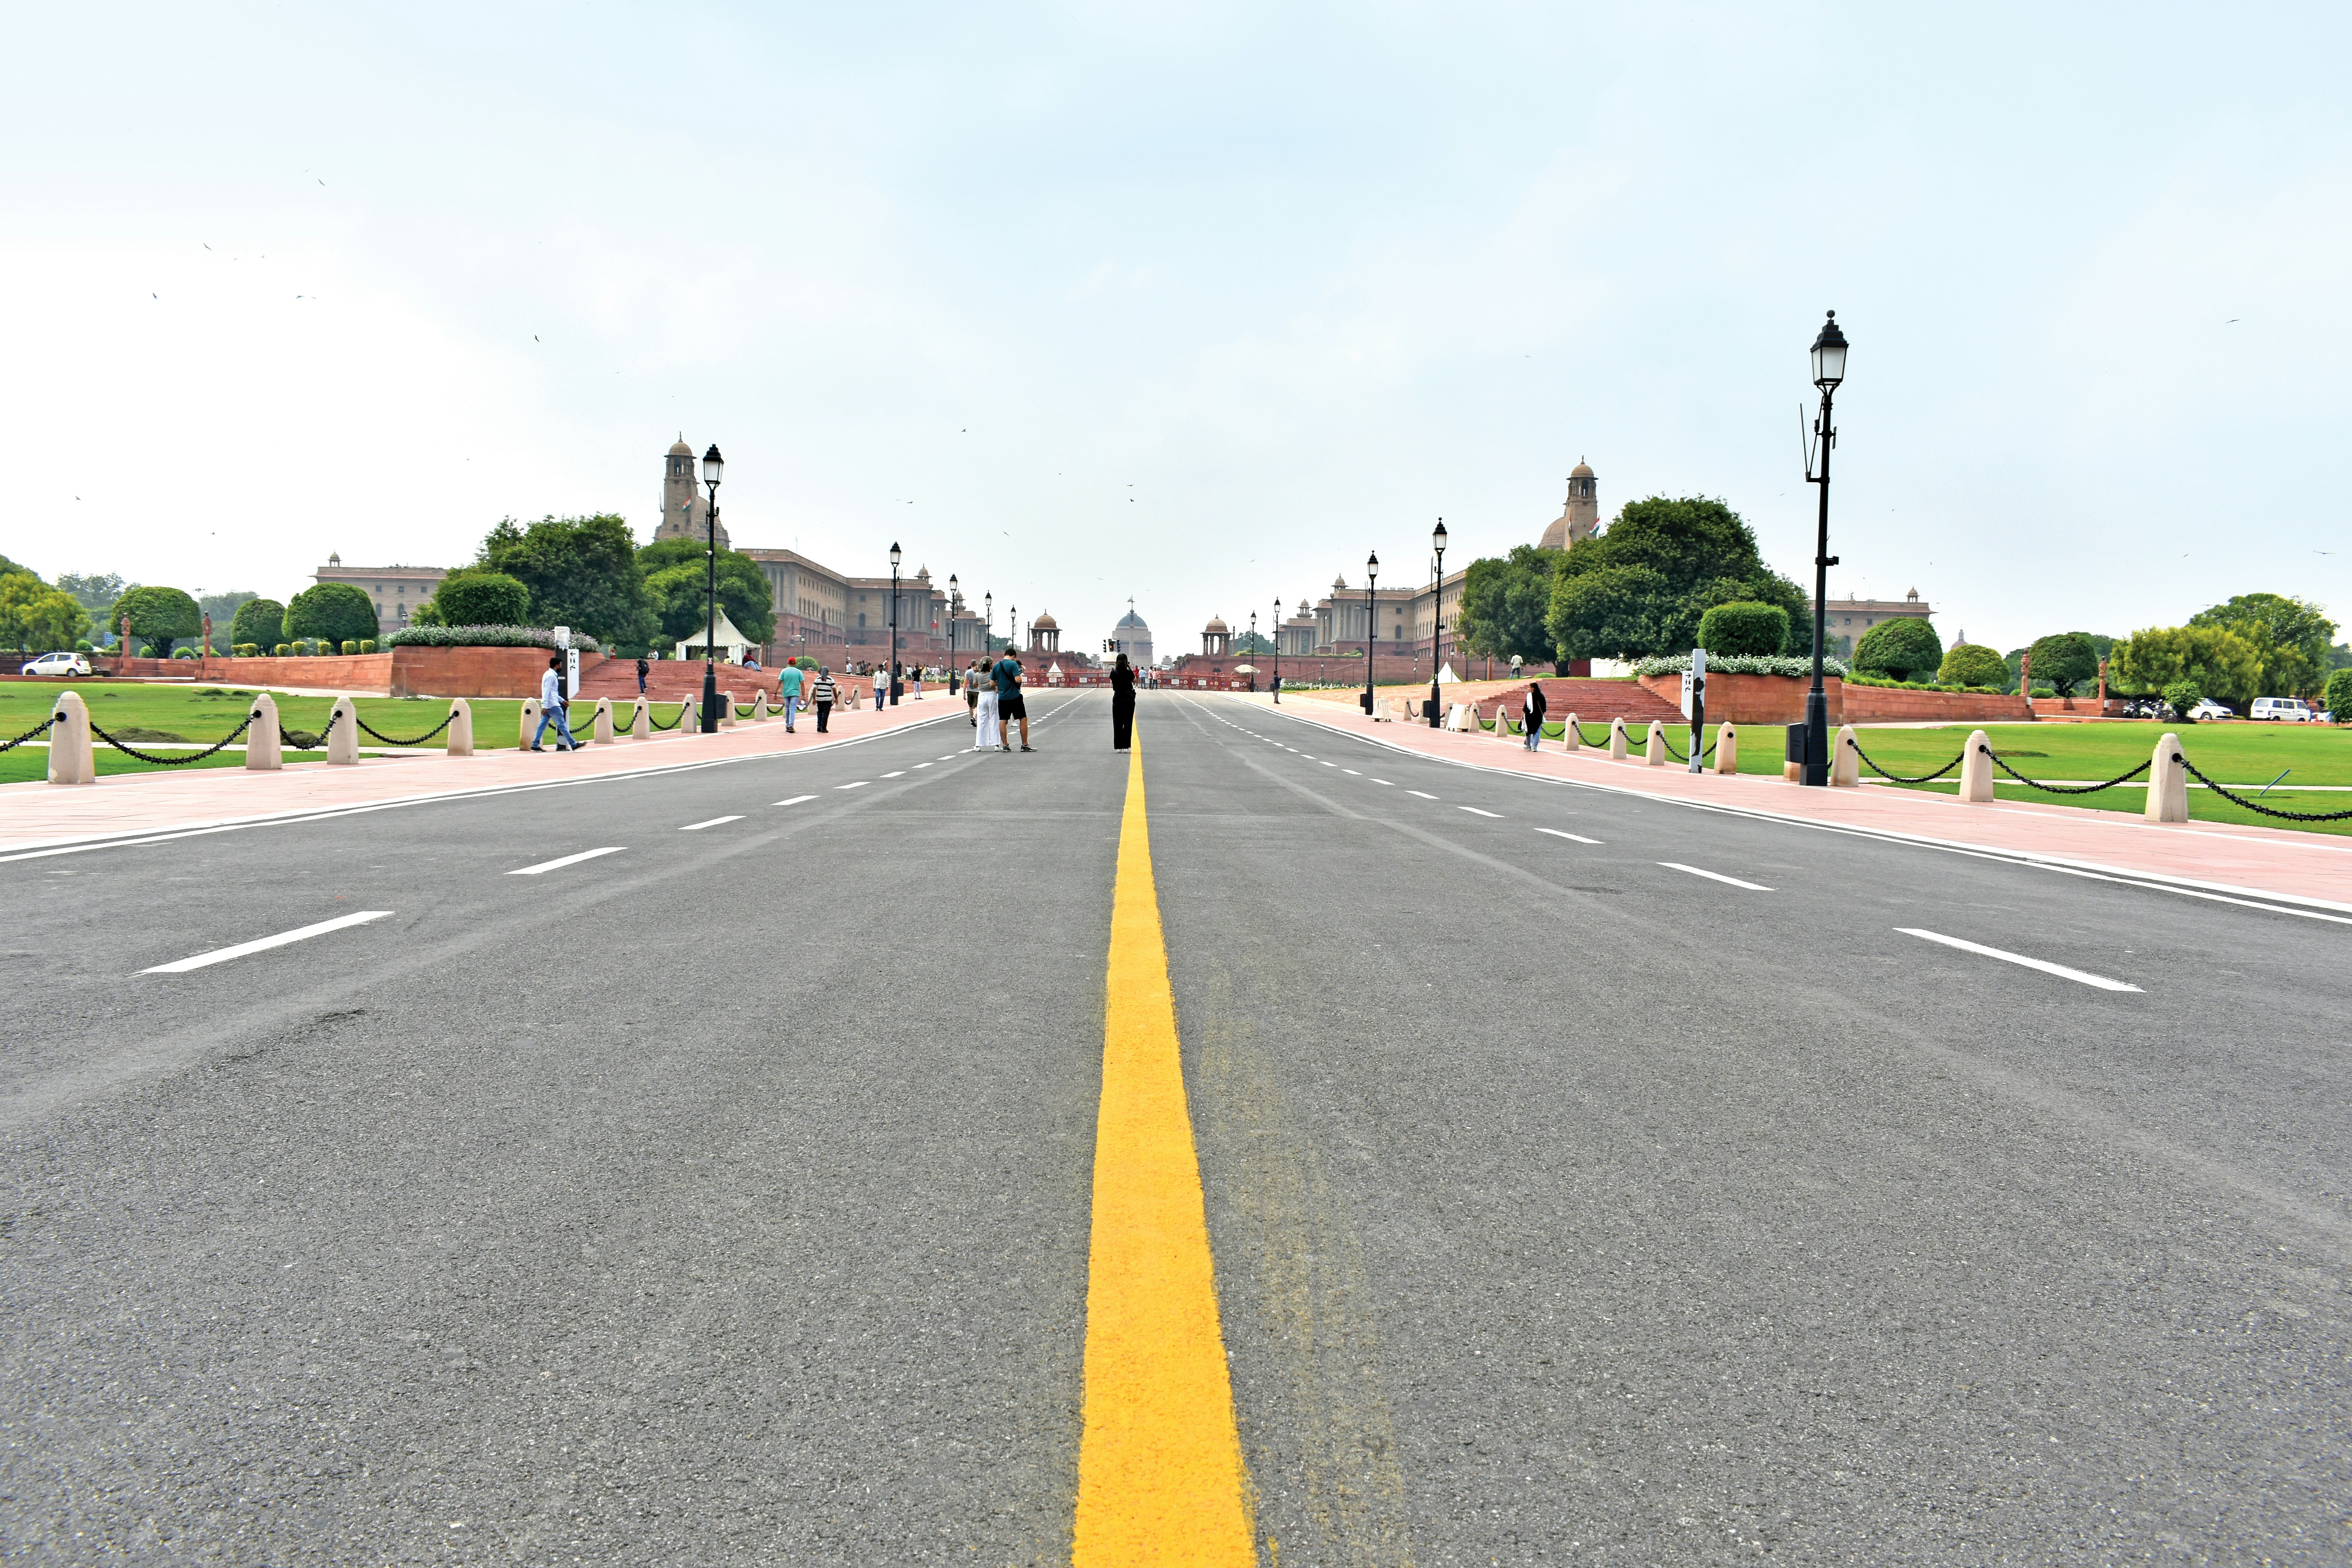 The ceremonial axis - Kartavya Path leading up to Rashtrapati Bhavan, the residence of the President of India flanked on either sides by North and South Blocks, New Delhi, India [Photo: September 2022]